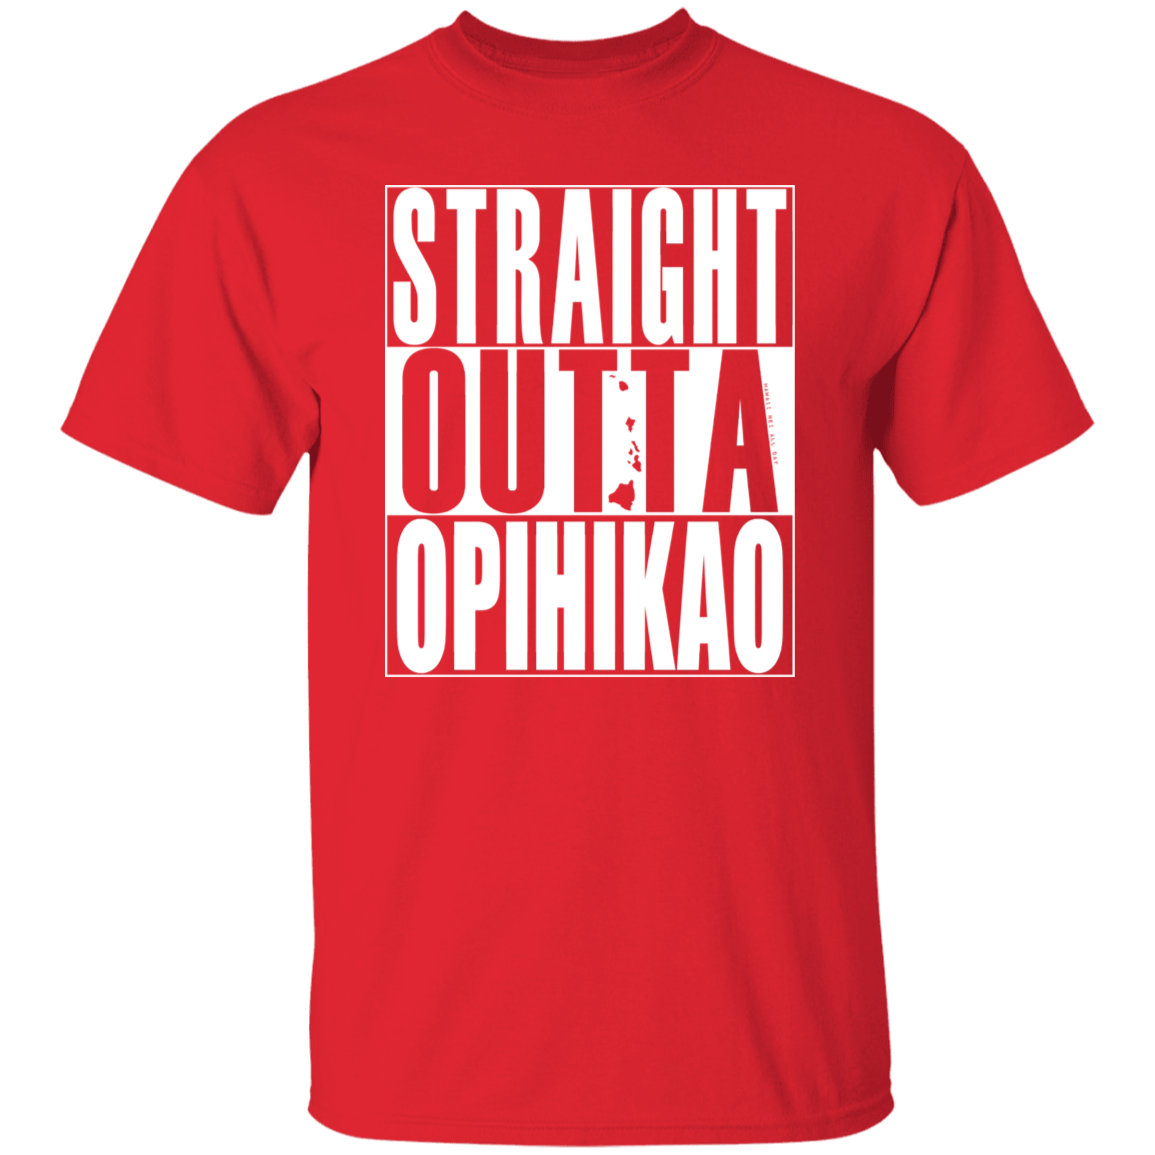 Straight Outta Opihikao (white ink) T-Shirt